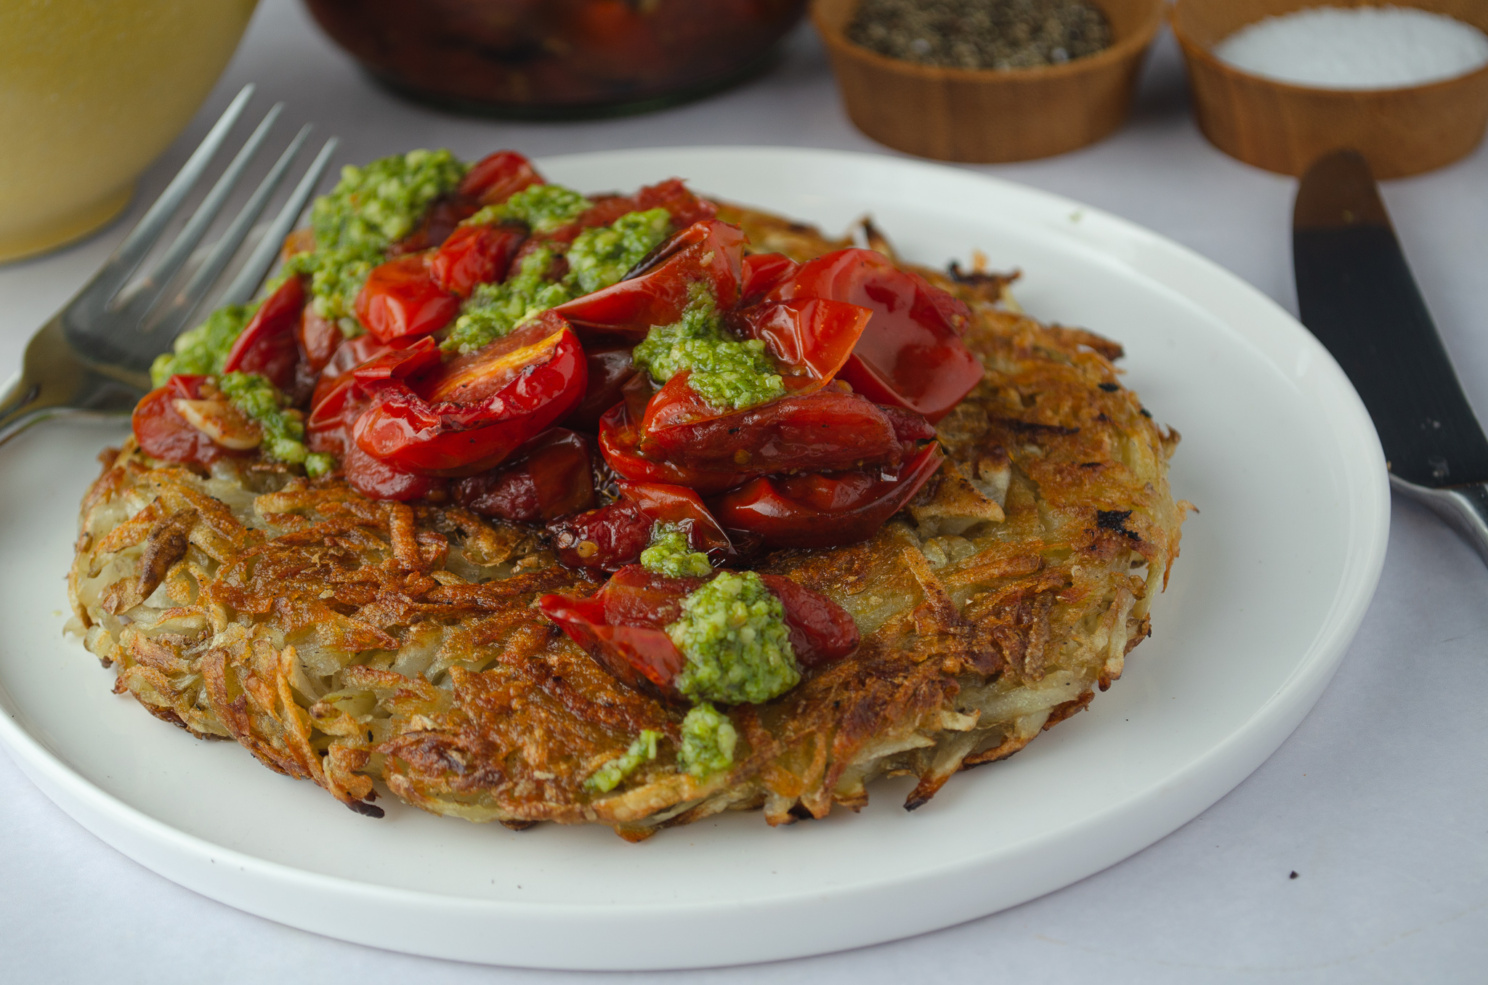 A quick and easy recipe for crisp and delicious potato rostis which can be a hearty vegan meal with the right toppings- here we used tomato confit and pesto